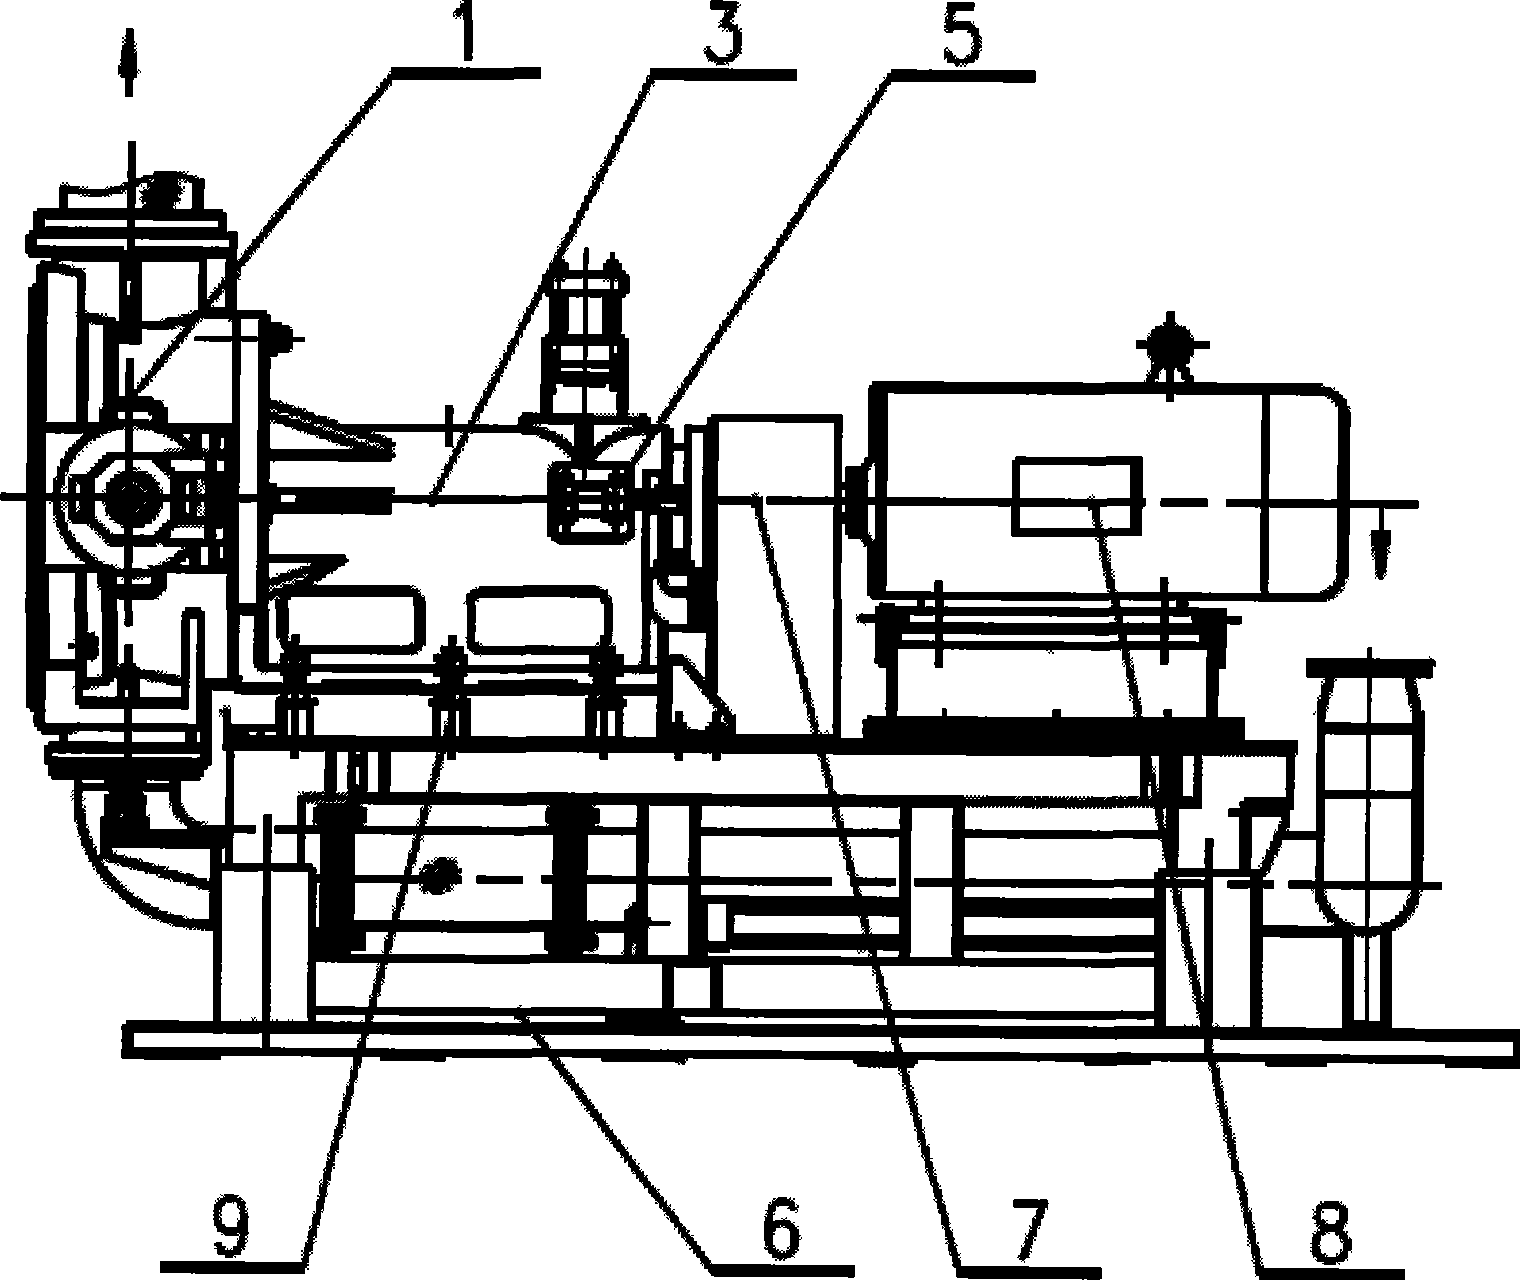 Underwater pelleting device of machine unit for compounding, squeezing and prilling